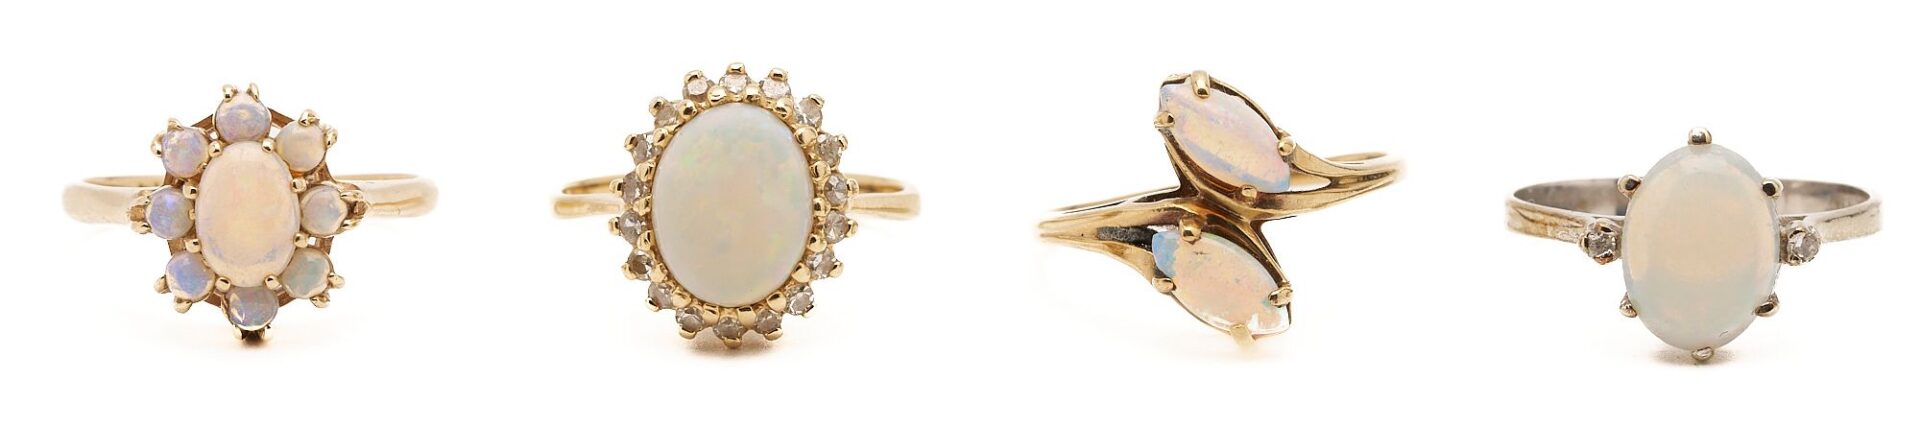 Lot 969: Four Gold & Opal Rings